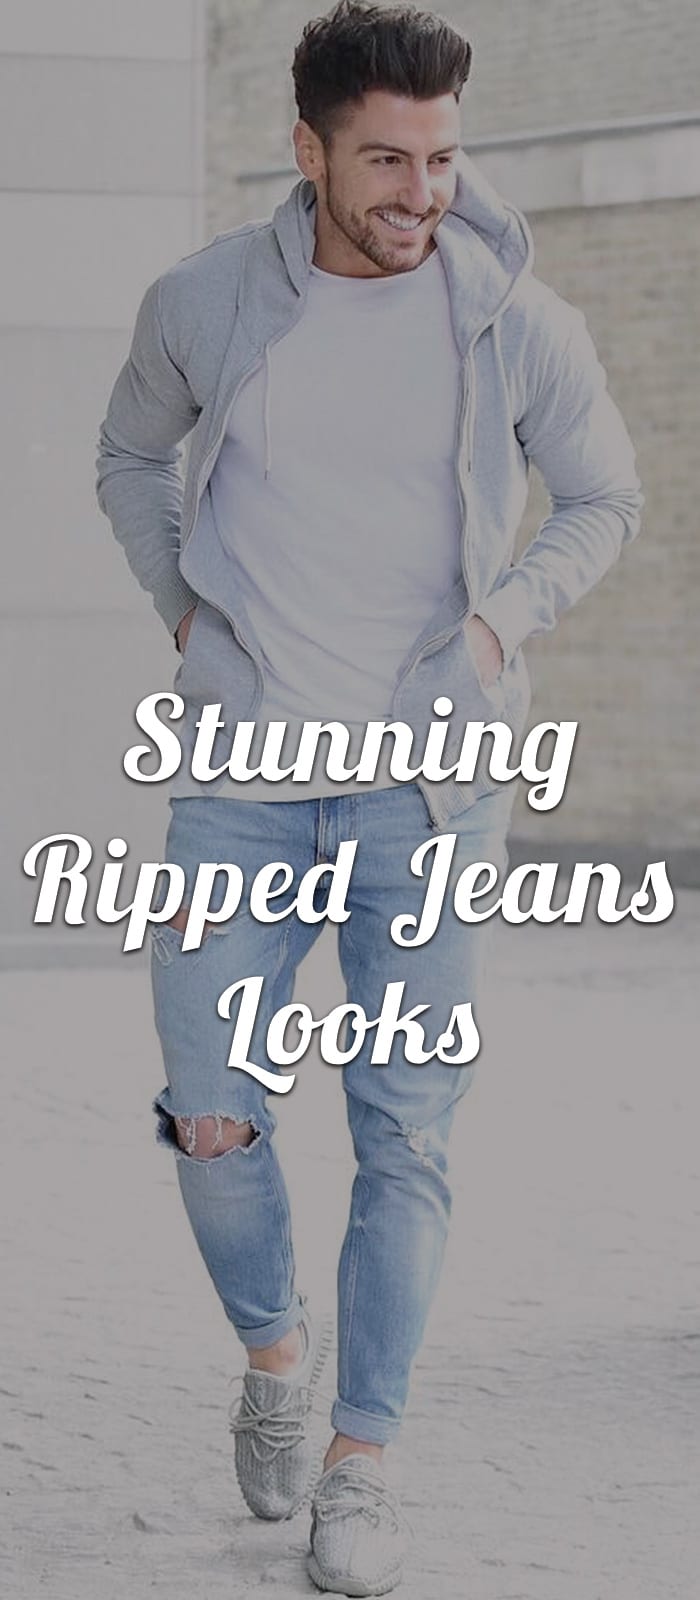 Stunning Ripped Jeans Looks- Blazer, Blue Ripped Jeans, Sneakers, Etc